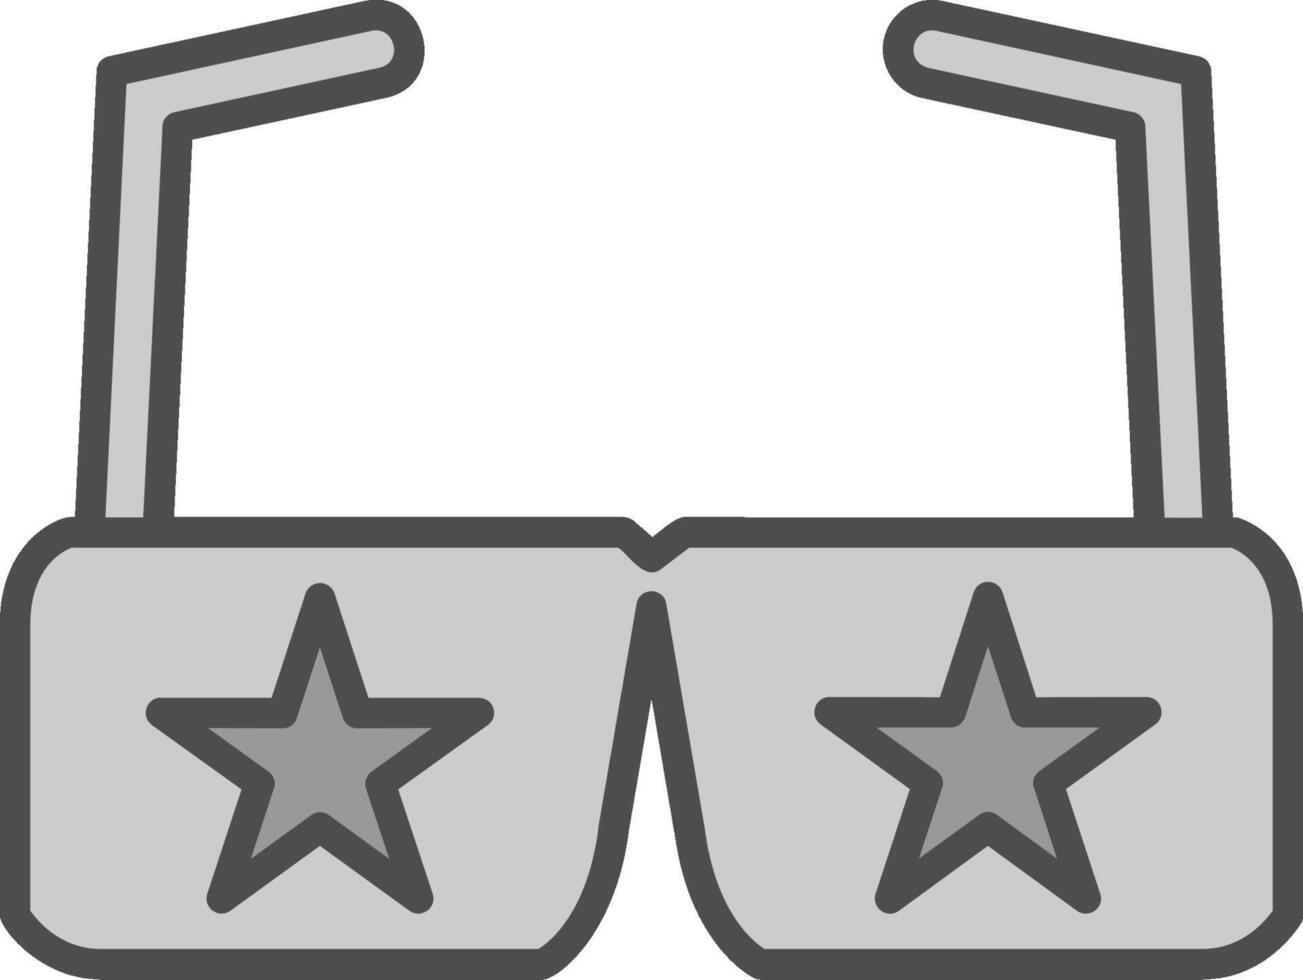 Party Glasses Line Filled Greyscale Icon Design vector